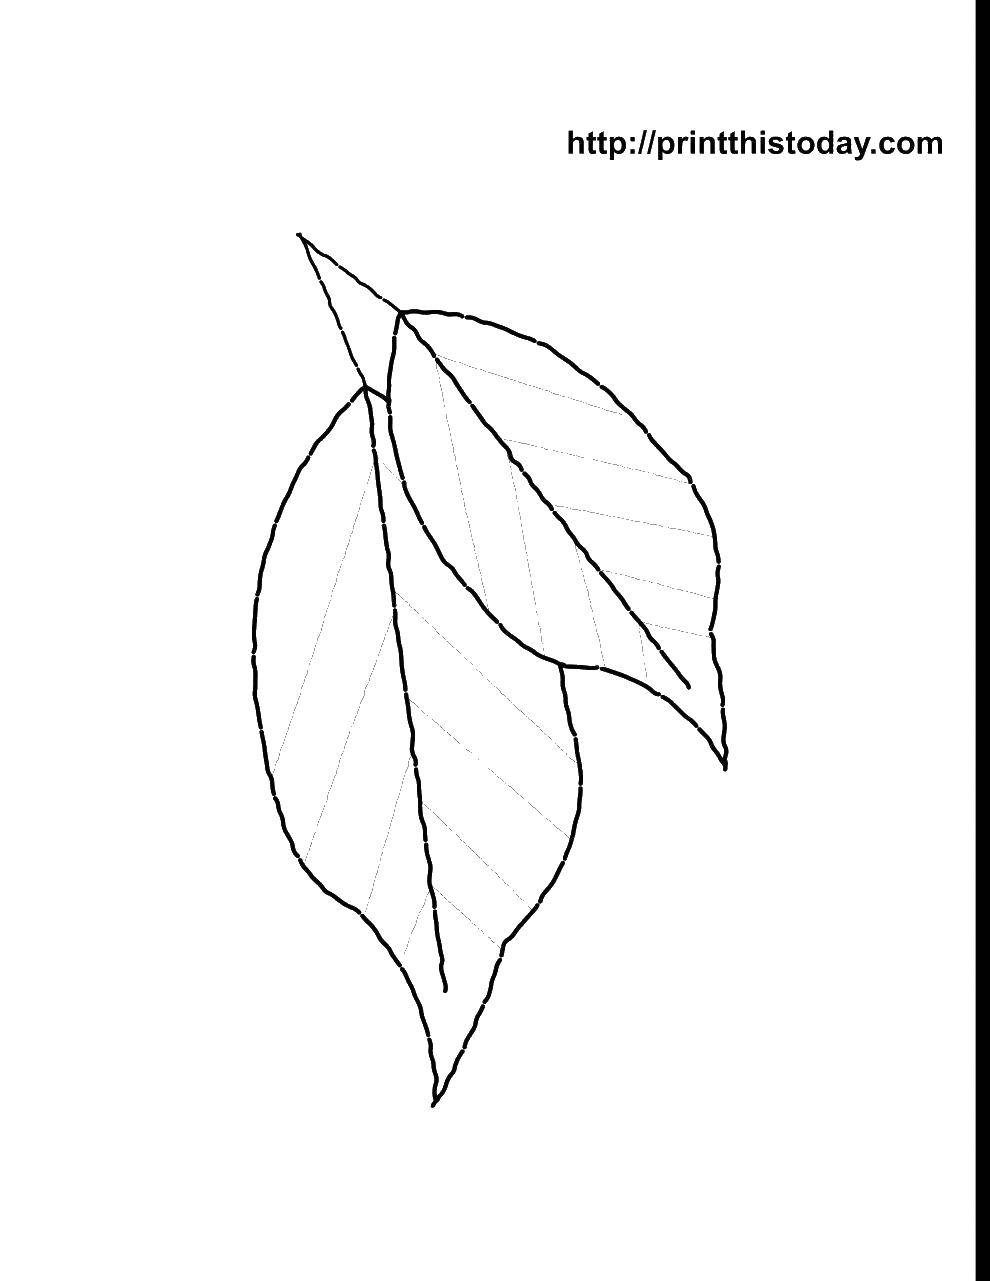 Coloring Two leaf. Category The contours of the leaves. Tags:  leaves, contours, trees.